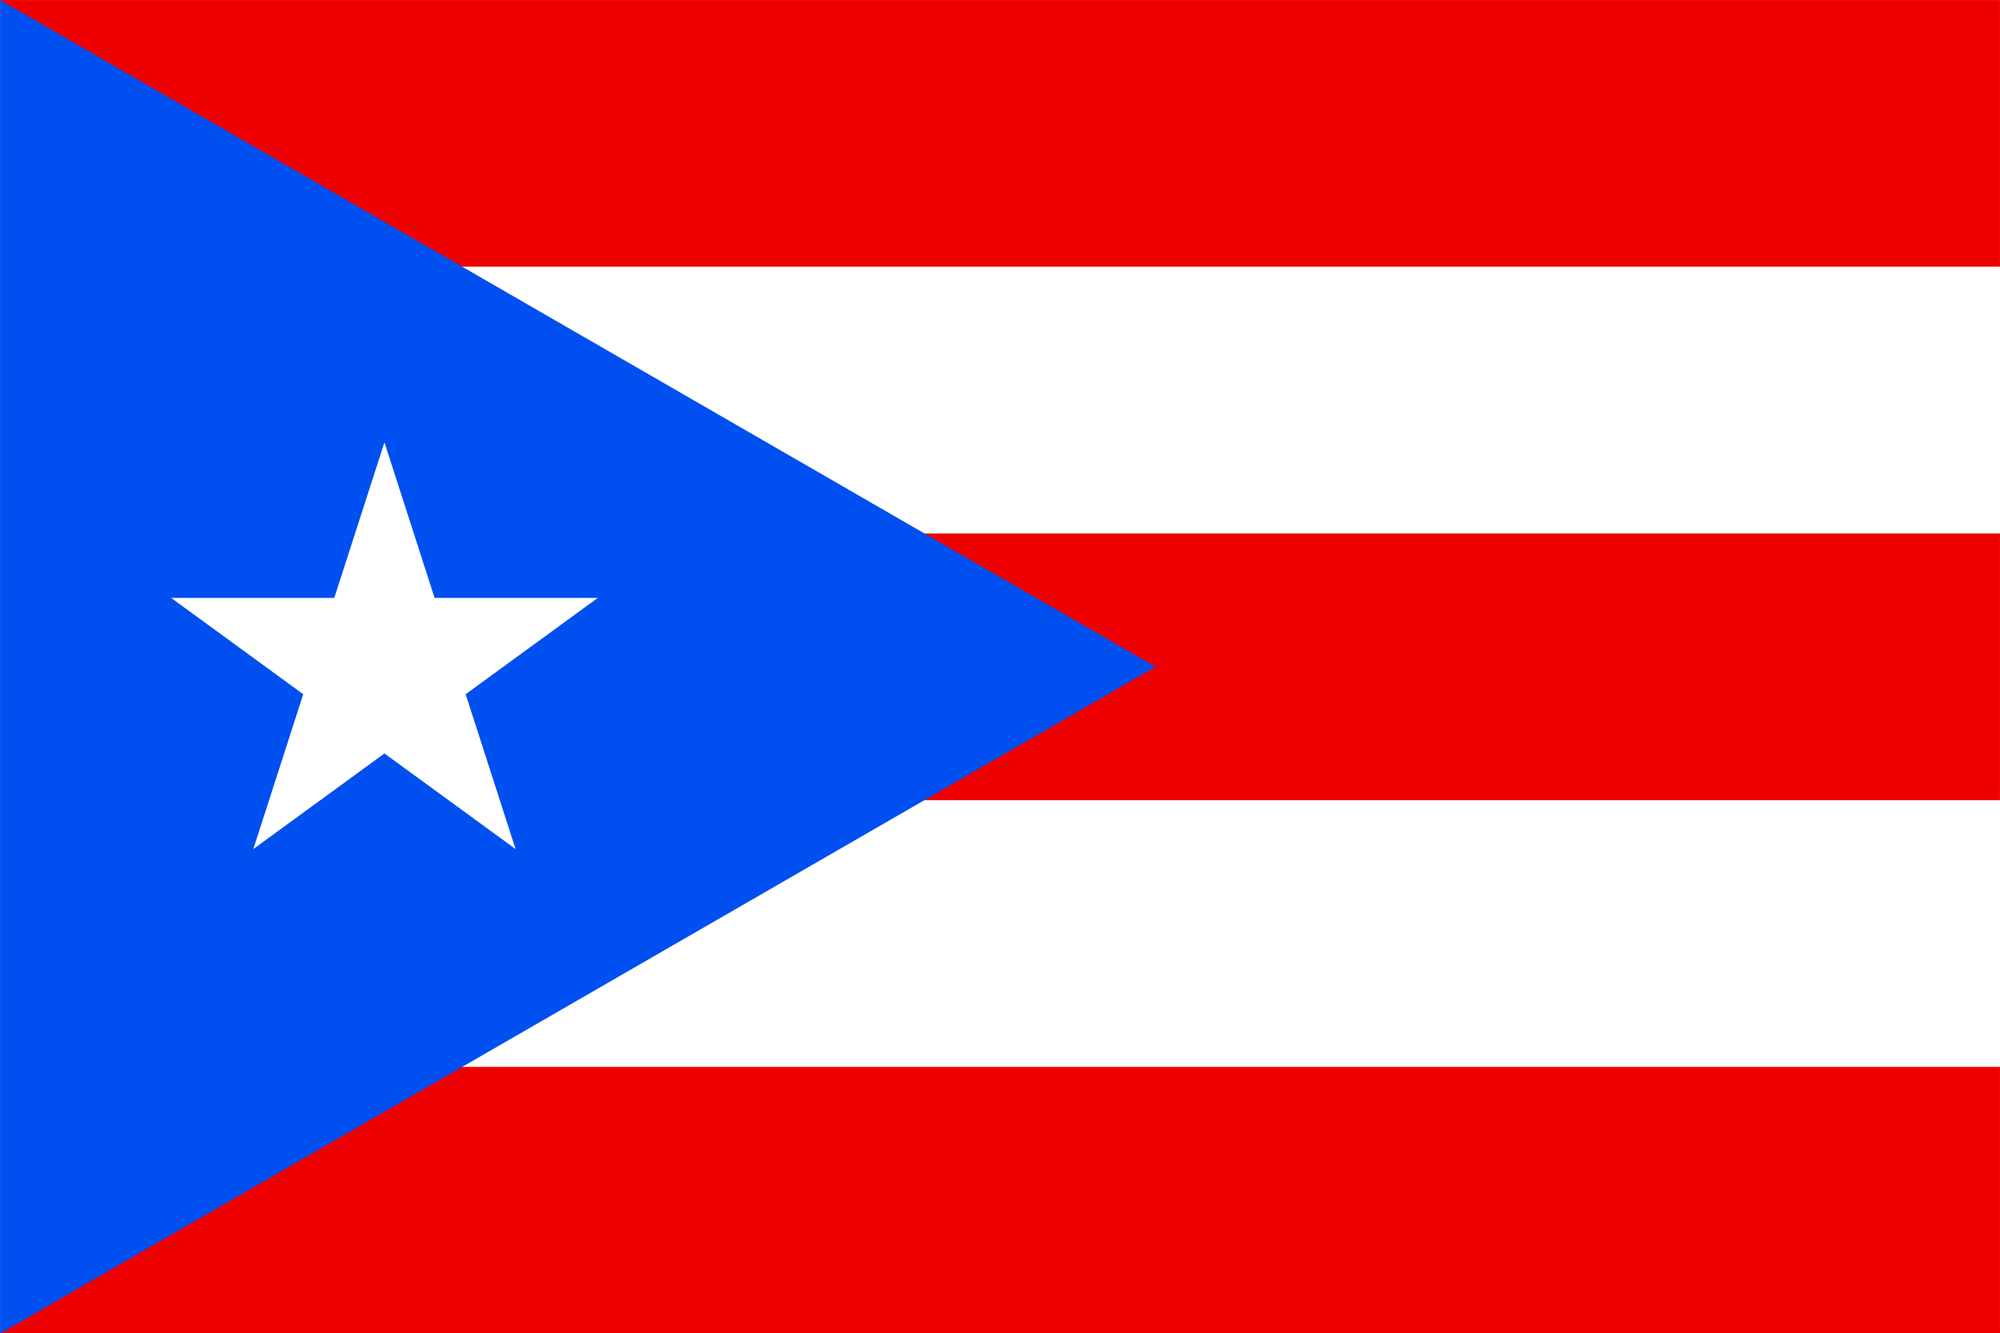 IMMAF welcomes new member in Puerto Rico